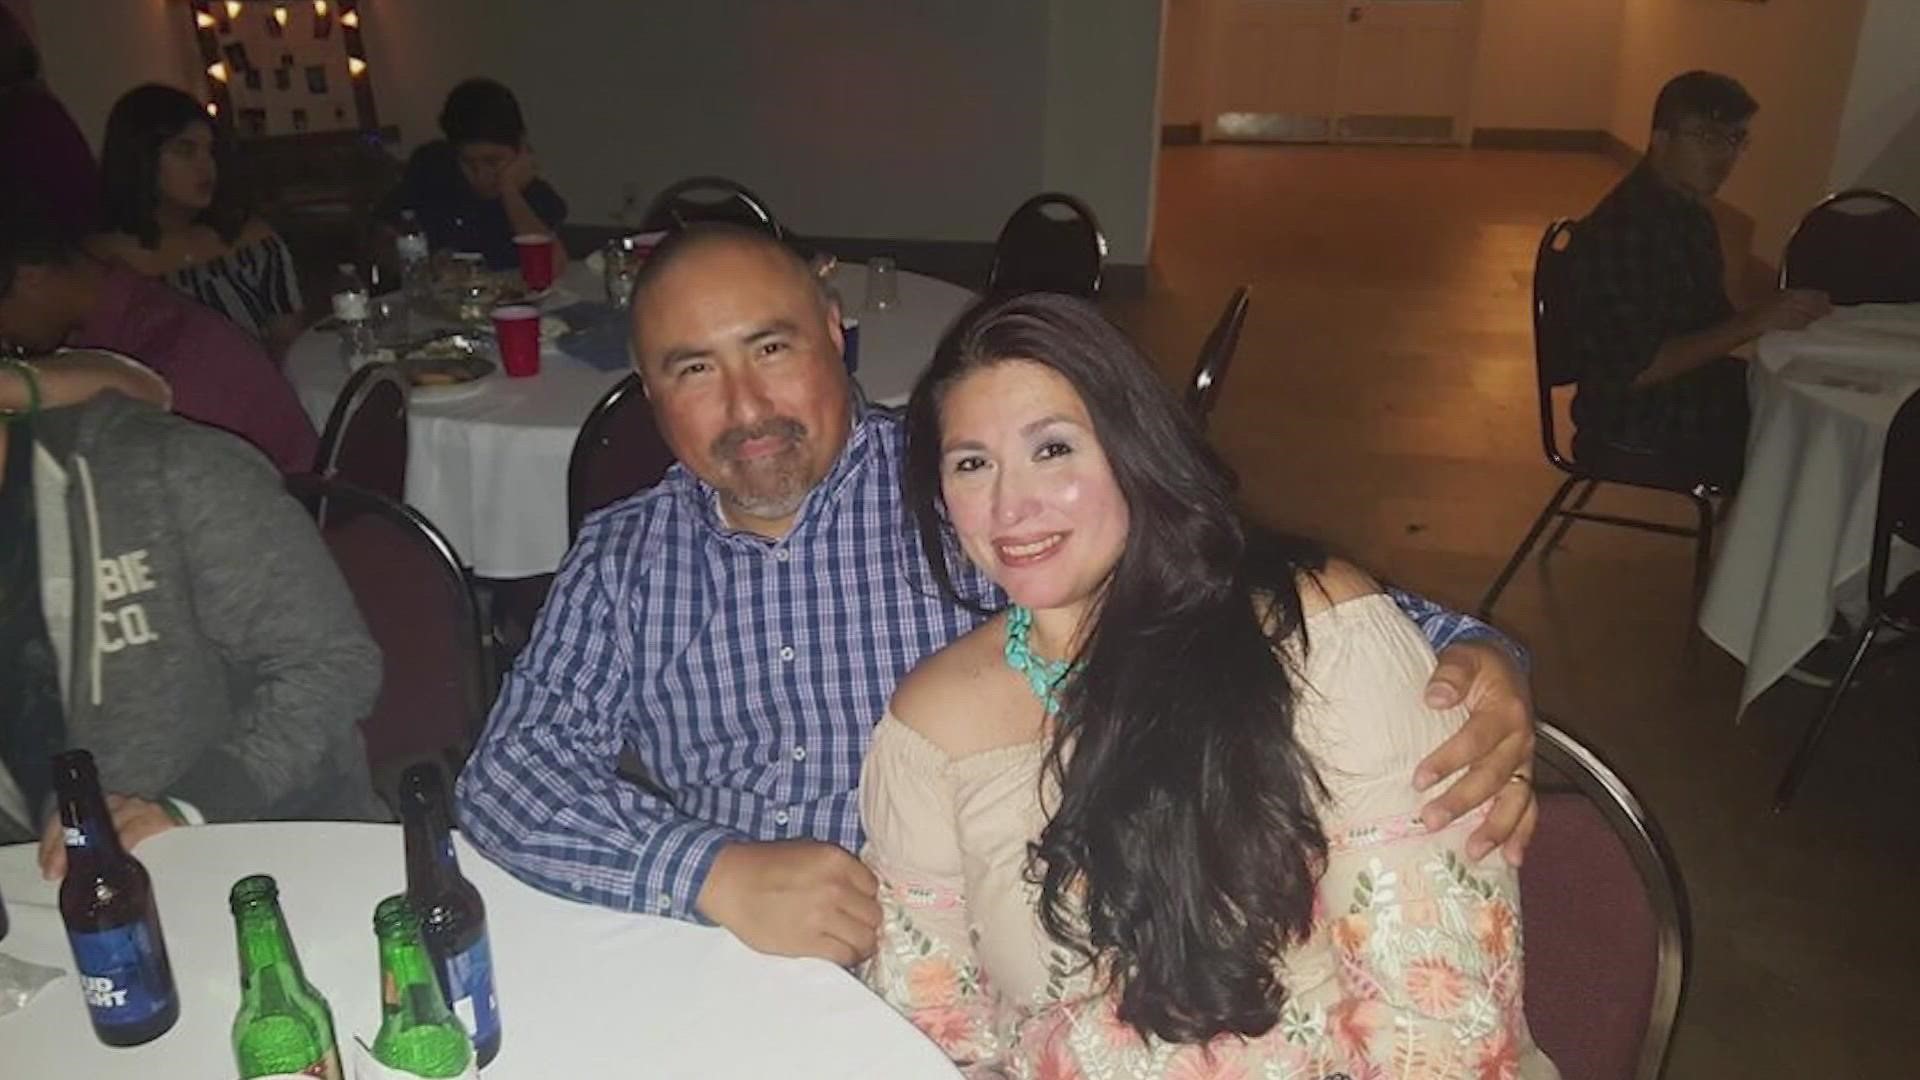 Irma Garcia was killed in the shooting at Robb Elementary School. Tragically, just days later, her husband, Joe, died of a heart attack.